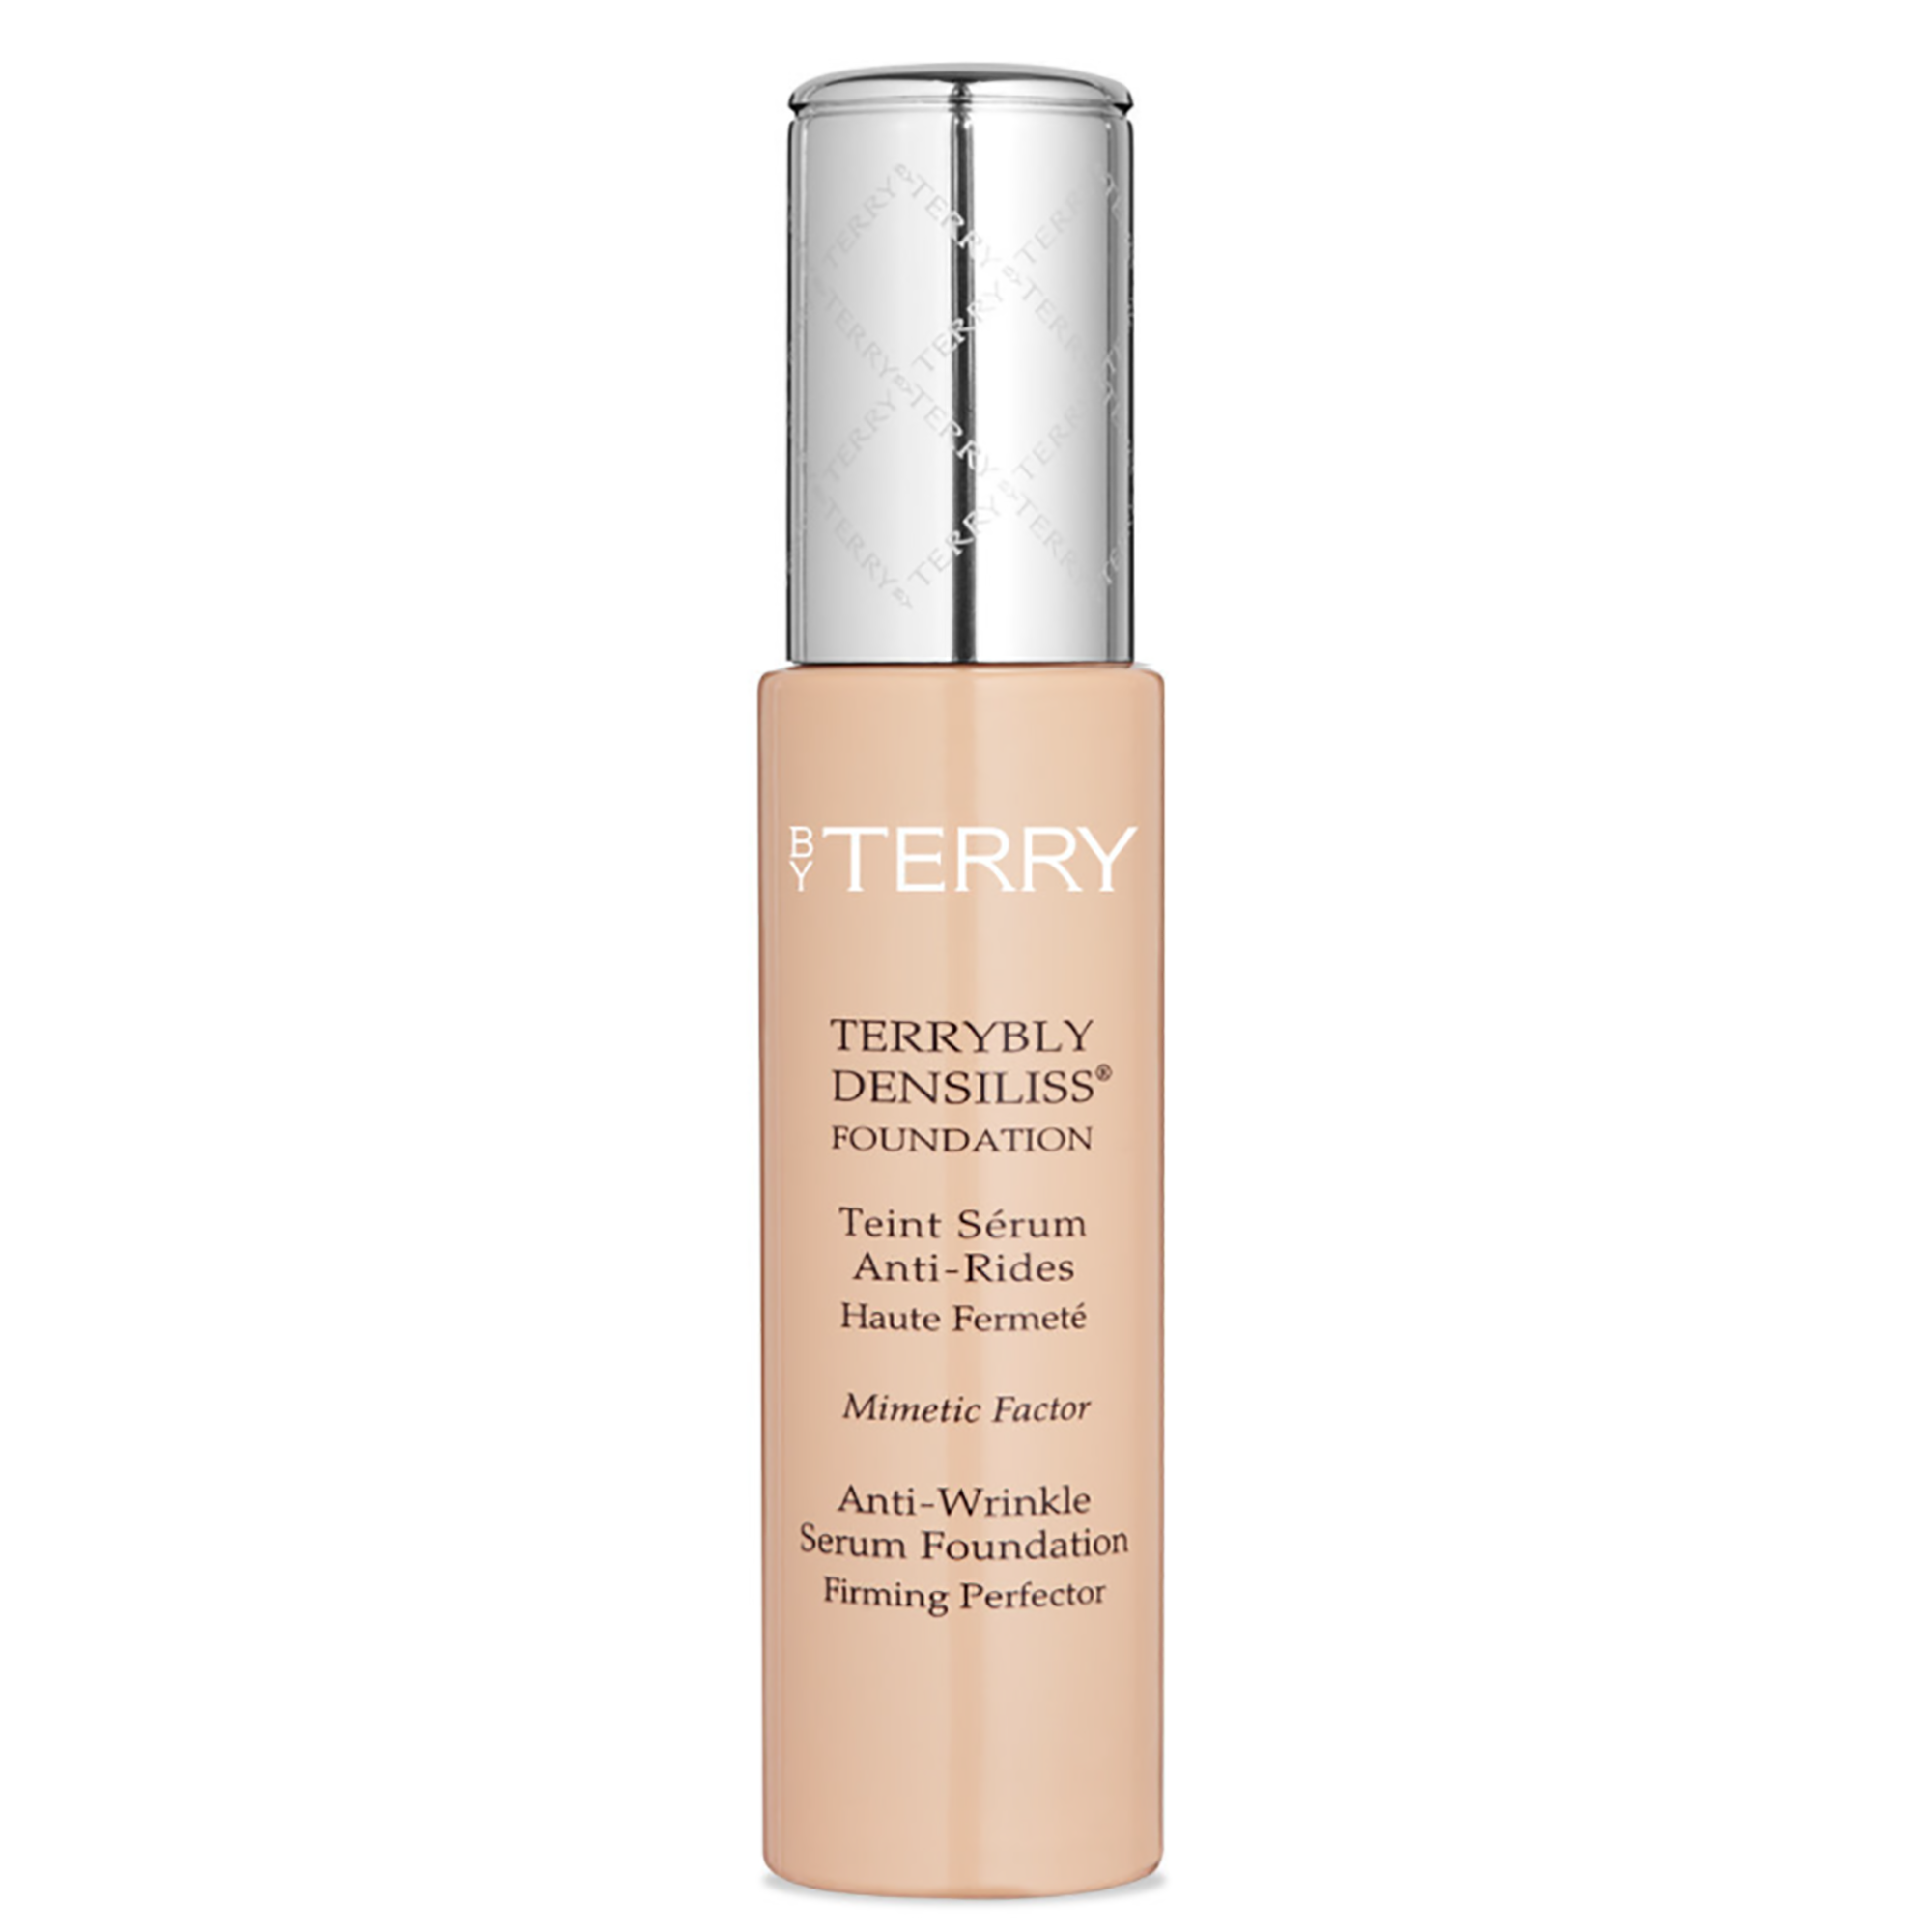 By Terry Terrybly Densiliss Anti-Wrinkle Serum Foundation #4 Natural Beige